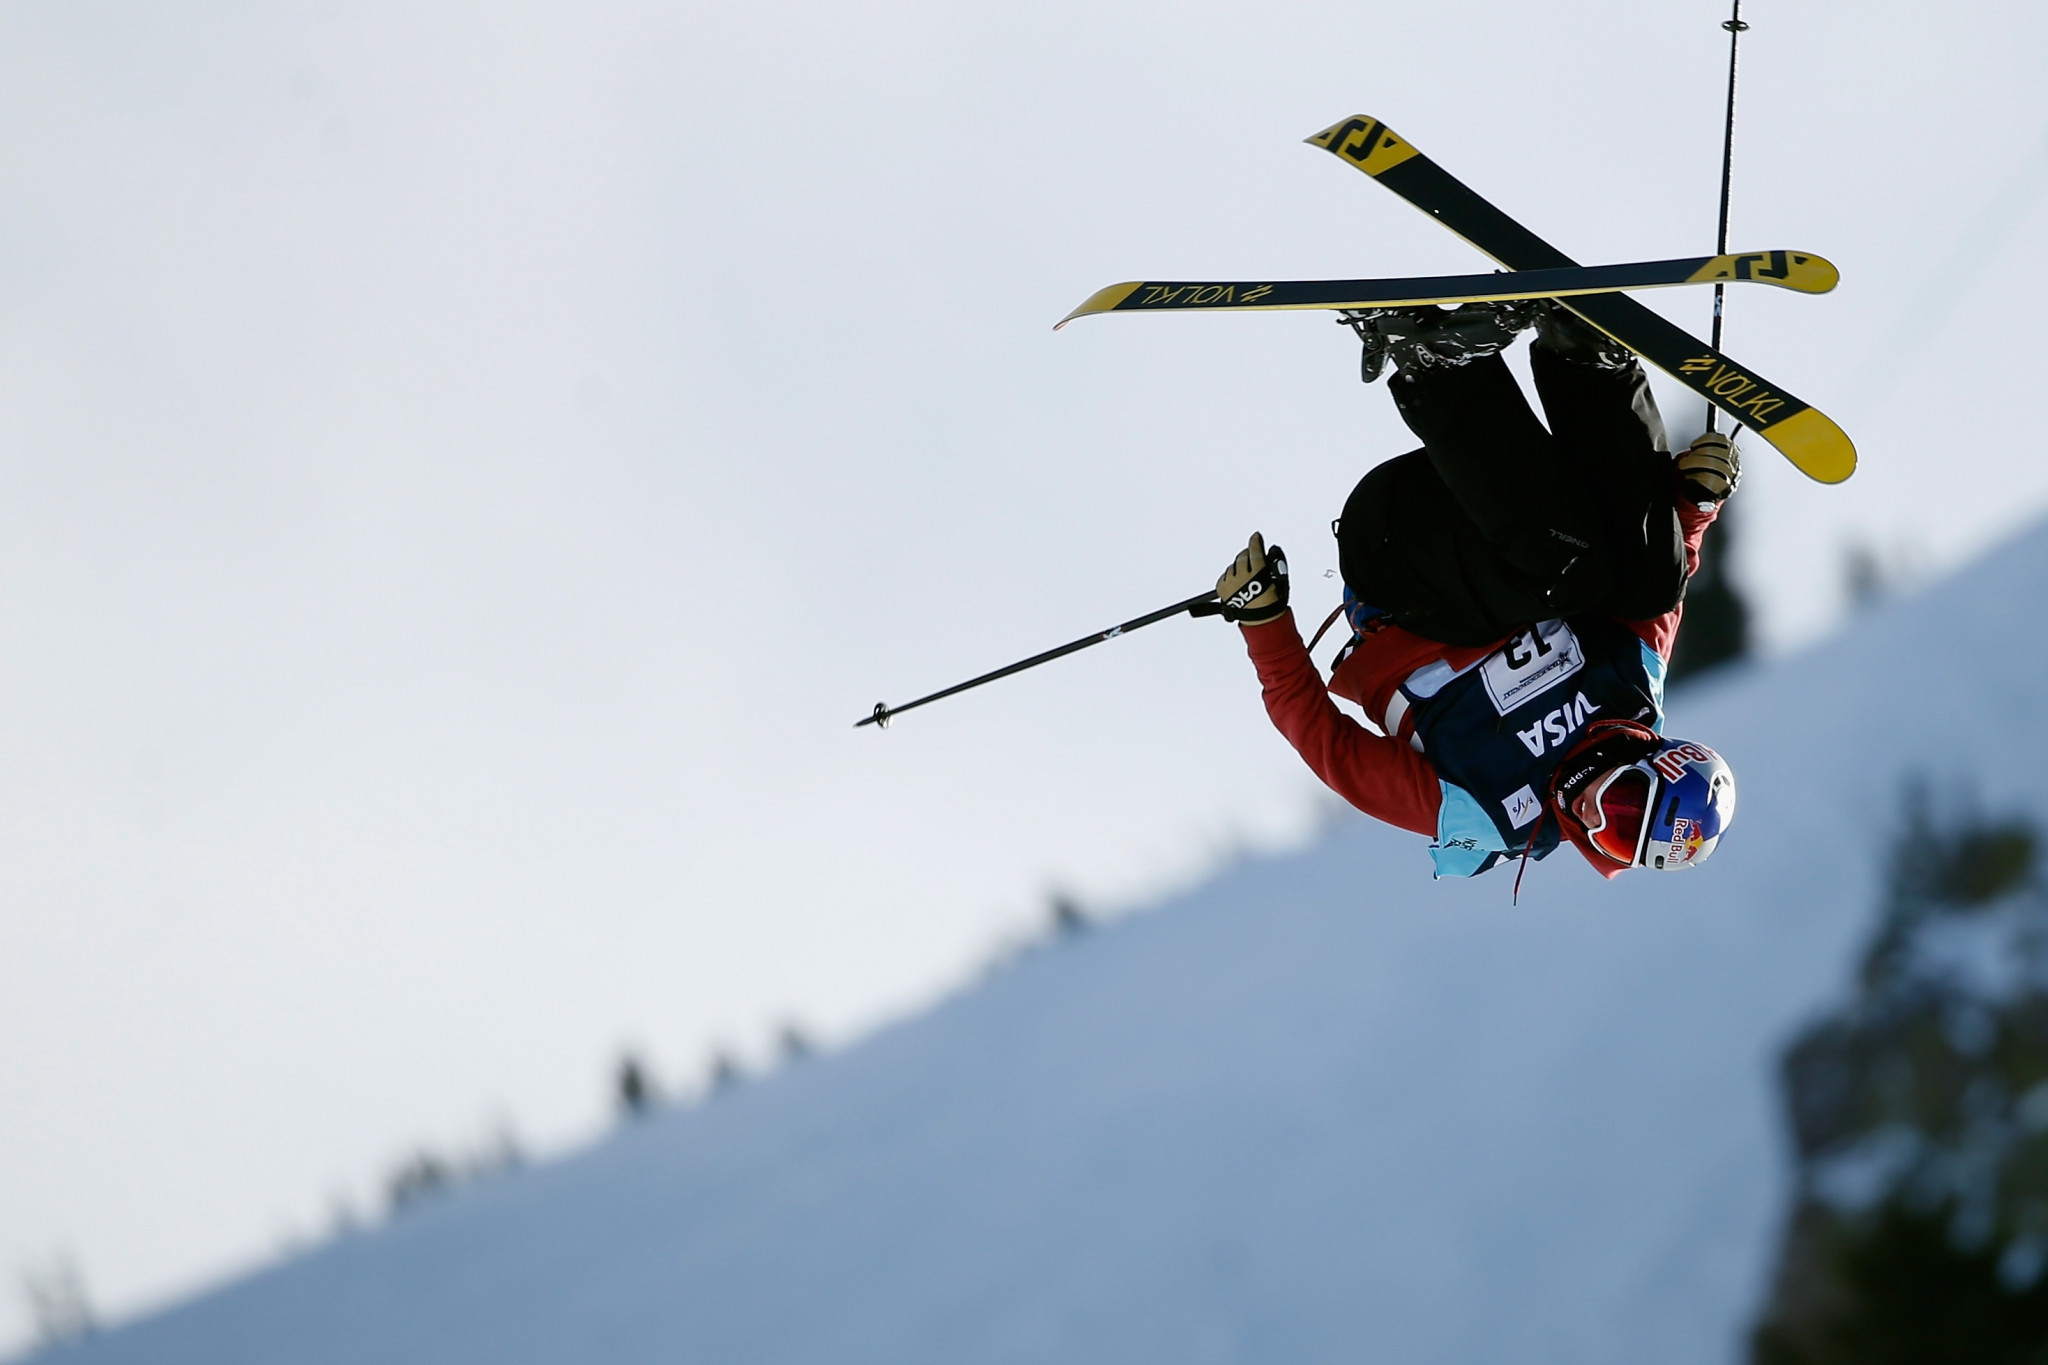 Norway’s Oystein Braaten won heat one of men's qualification at the FIS Slopestyle World Cup in Font Romeu ©Getty Images